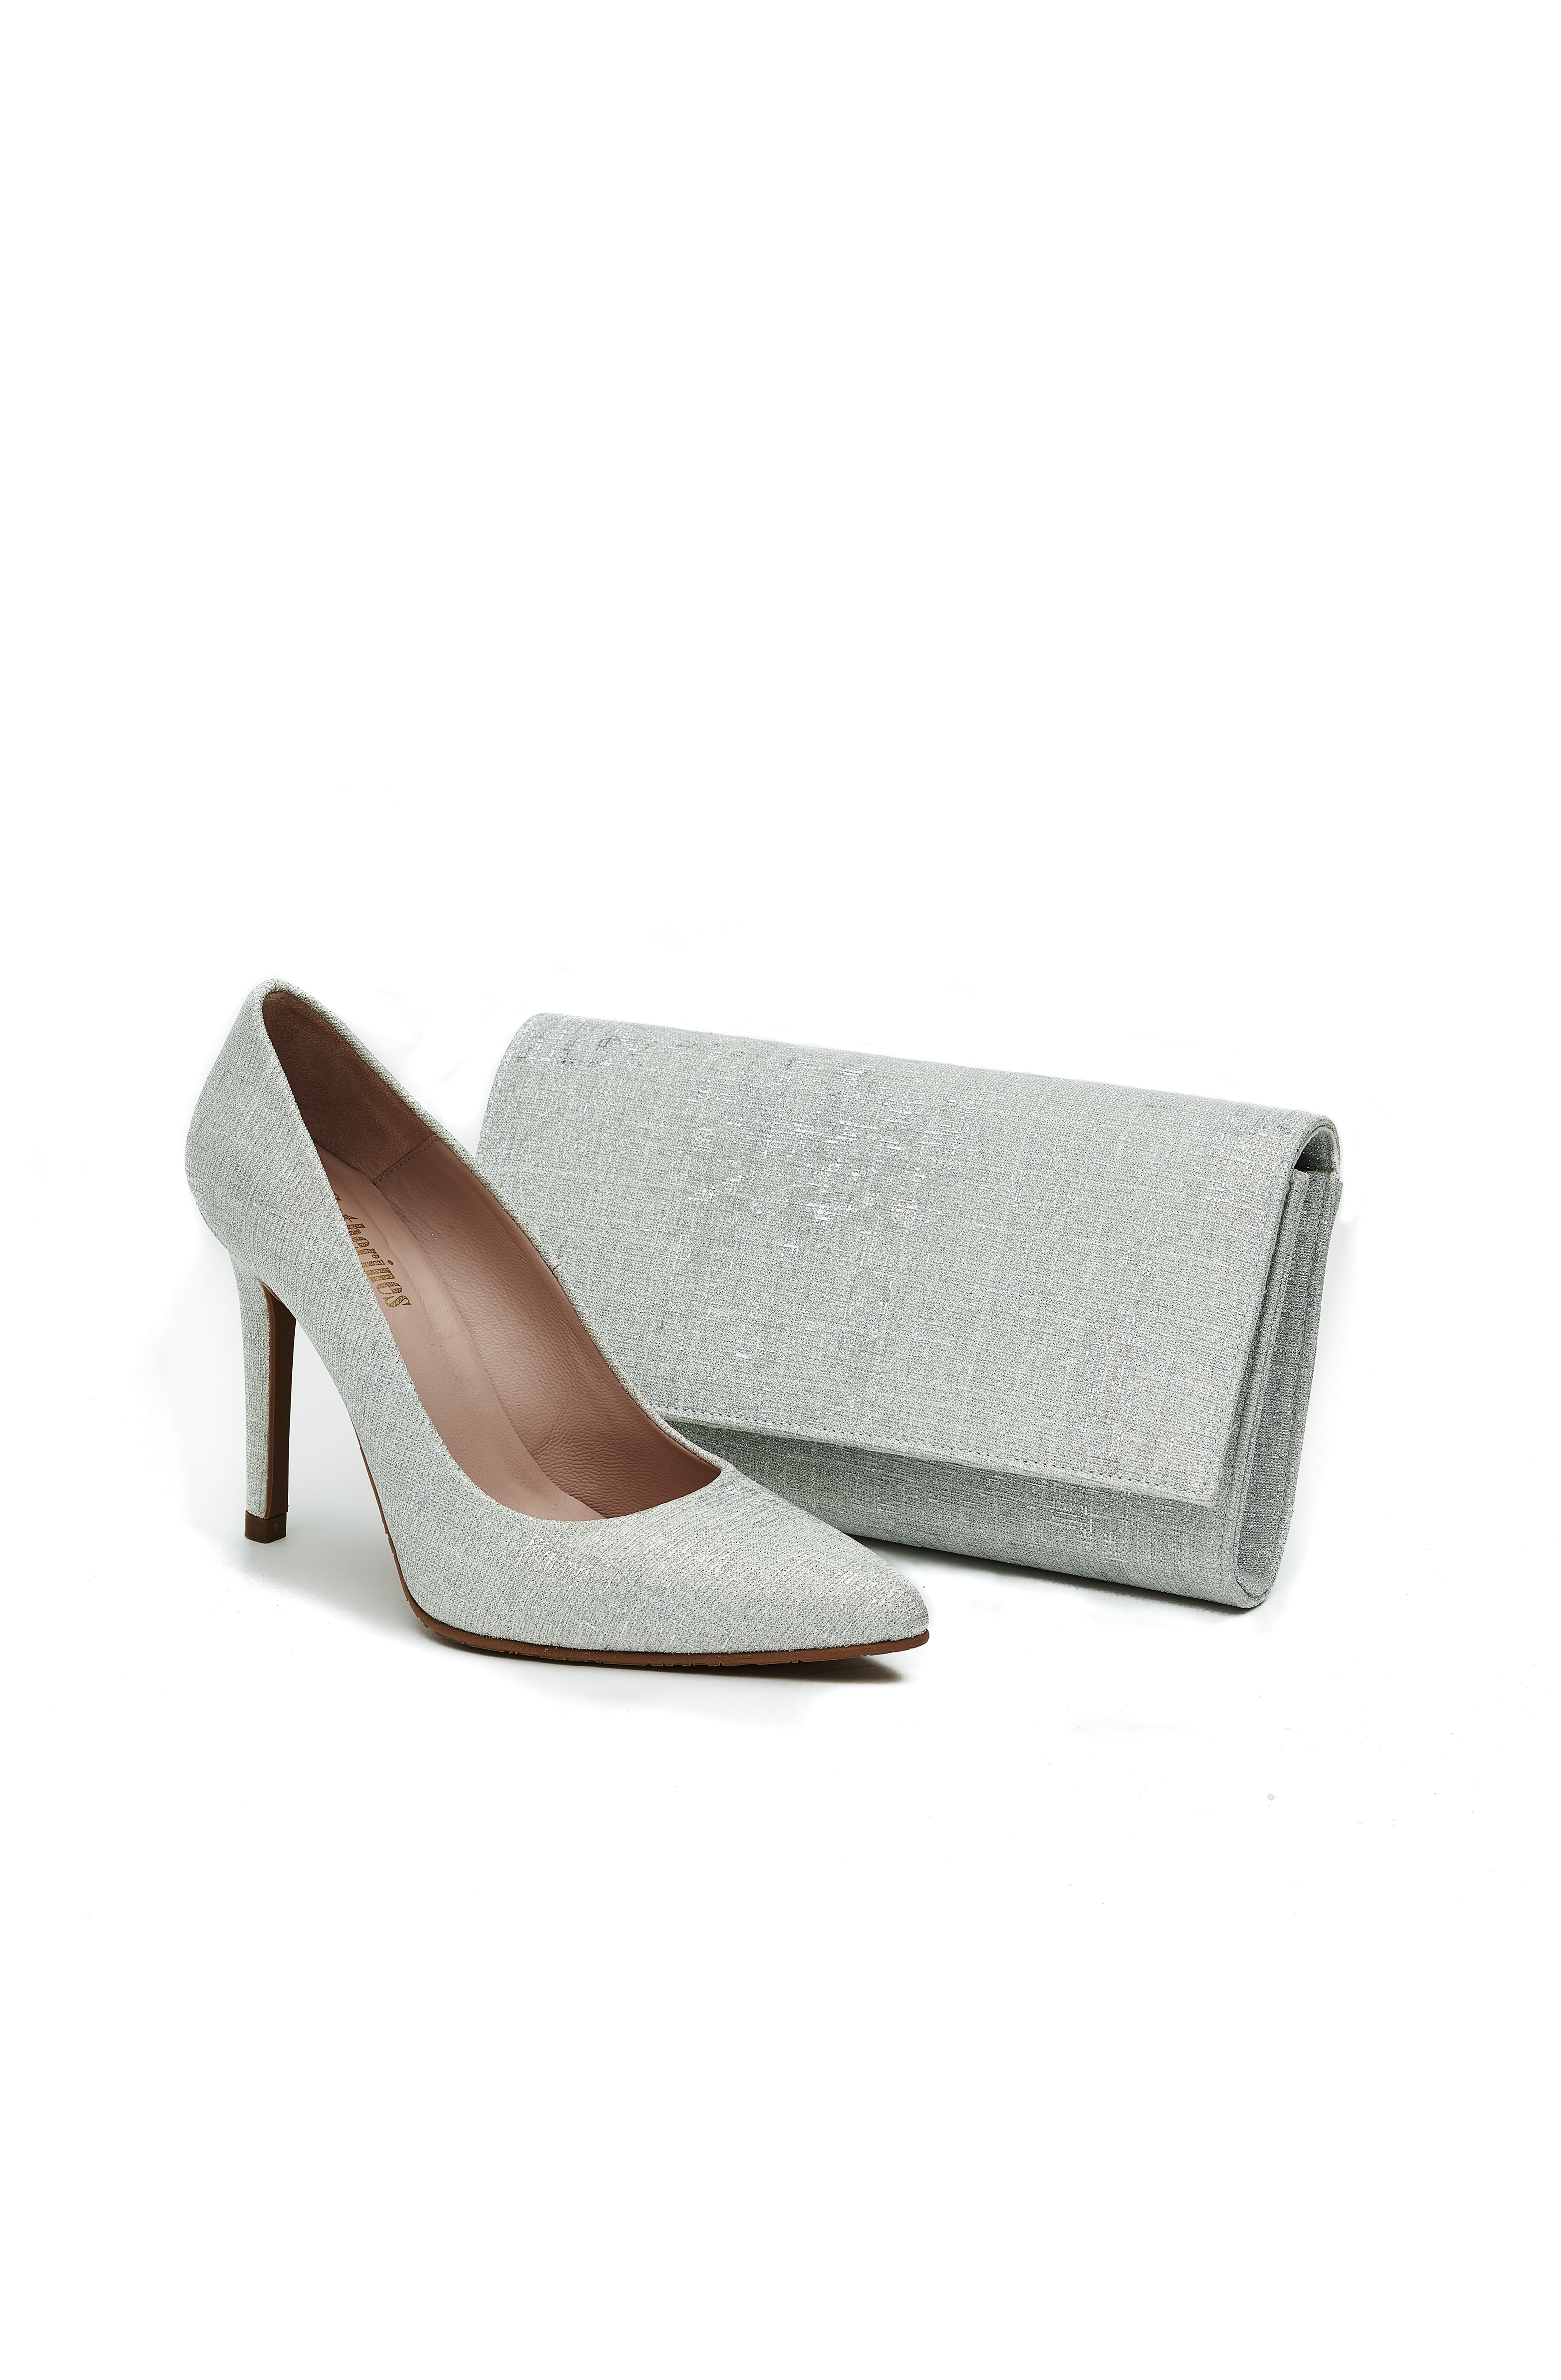 silver evening shoes and matching bag